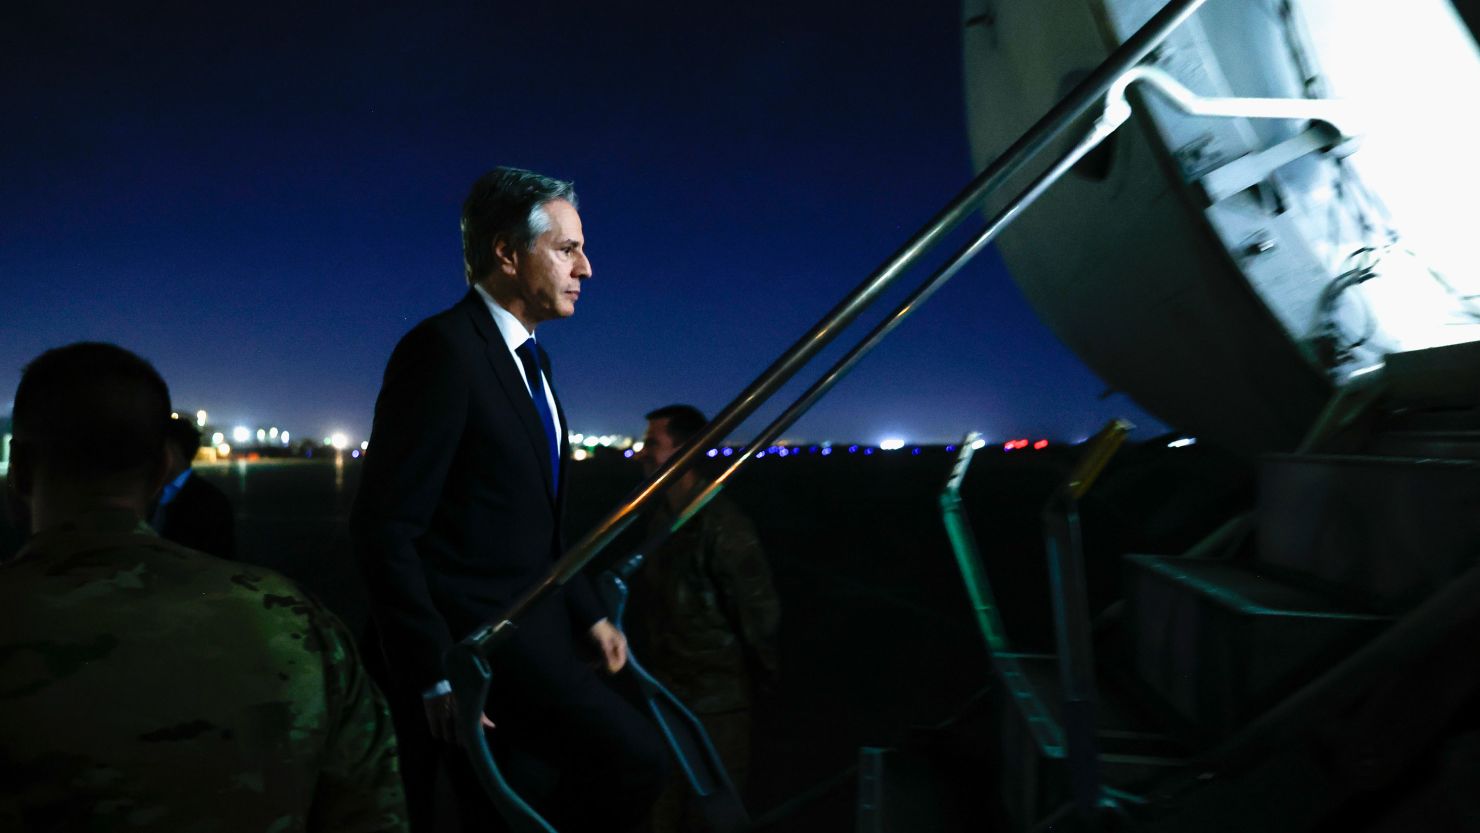 U.S. Secretary of State Antony Blinken boards his military transport aircraft to depart Baghdad International Airport after meeting Iraqi Prime Minister Mohammed Shia al-Sudani, in Baghdad, Iraq, Sunday Nov. 5, 2023. Blinken flew to Baghdad for talks with Iraqi Prime Mohammed Shia al-Sudani as American forces in the region face a surge of attacks by Iranian-allied militias in Iraq and elsewhere. (Jonathan Ernst/Pool via AP)